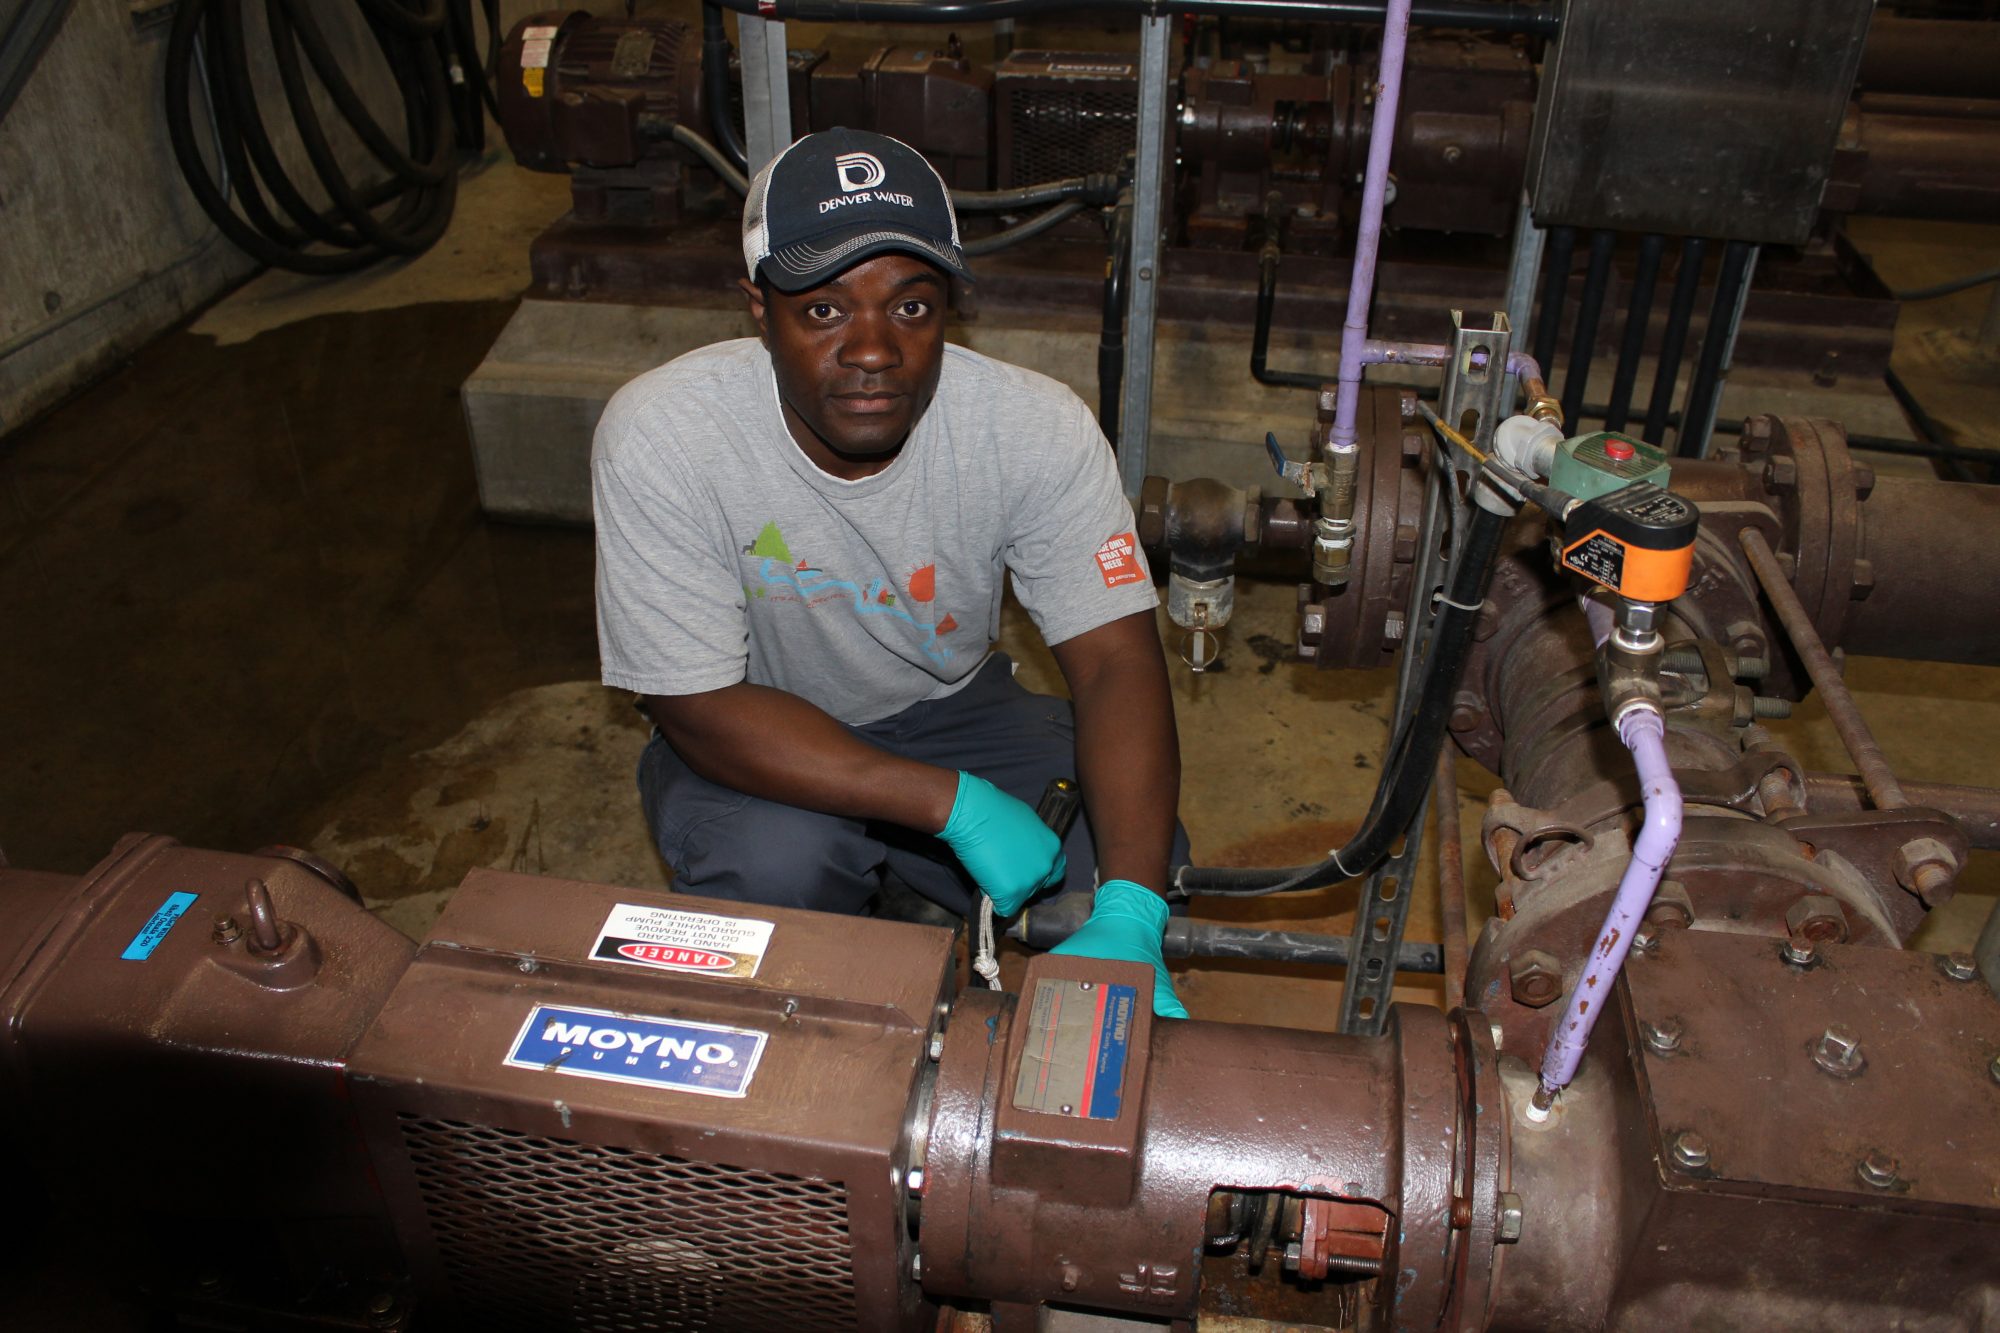 Mac Noah works at one of Denver Water's treatment plants.